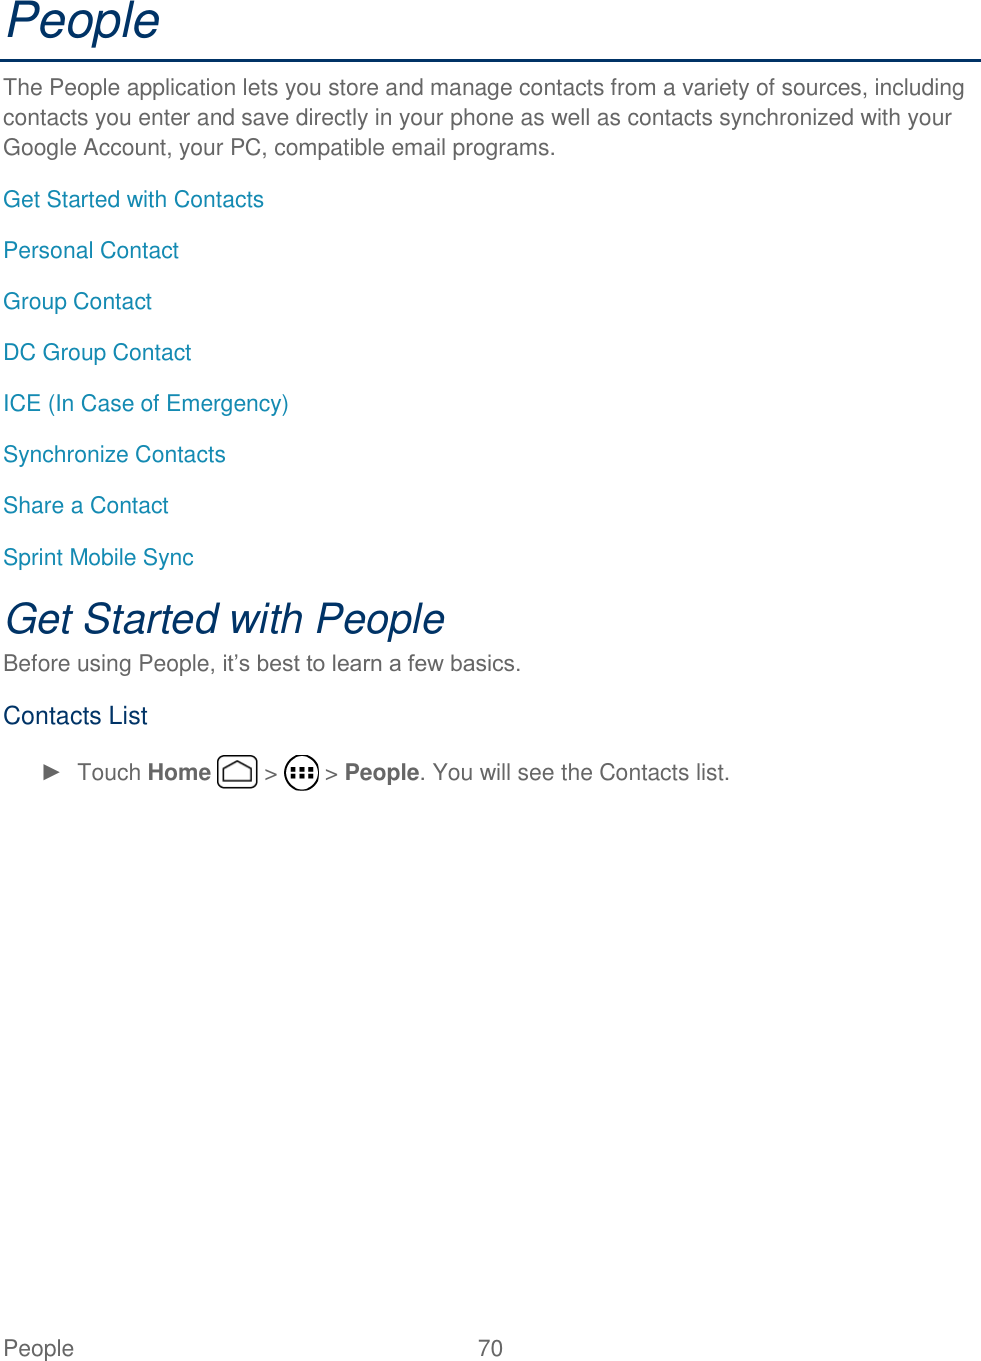 People  70   People The People application lets you store and manage contacts from a variety of sources, including contacts you enter and save directly in your phone as well as contacts synchronized with your Google Account, your PC, compatible email programs. Get Started with Contacts Personal Contact Group Contact DC Group Contact  ICE (In Case of Emergency) Synchronize Contacts Share a Contact Sprint Mobile Sync Get Started with People Before using People, it’s best to learn a few basics. Contacts List ►  Touch Home   &gt;   &gt; People. You will see the Contacts list. 